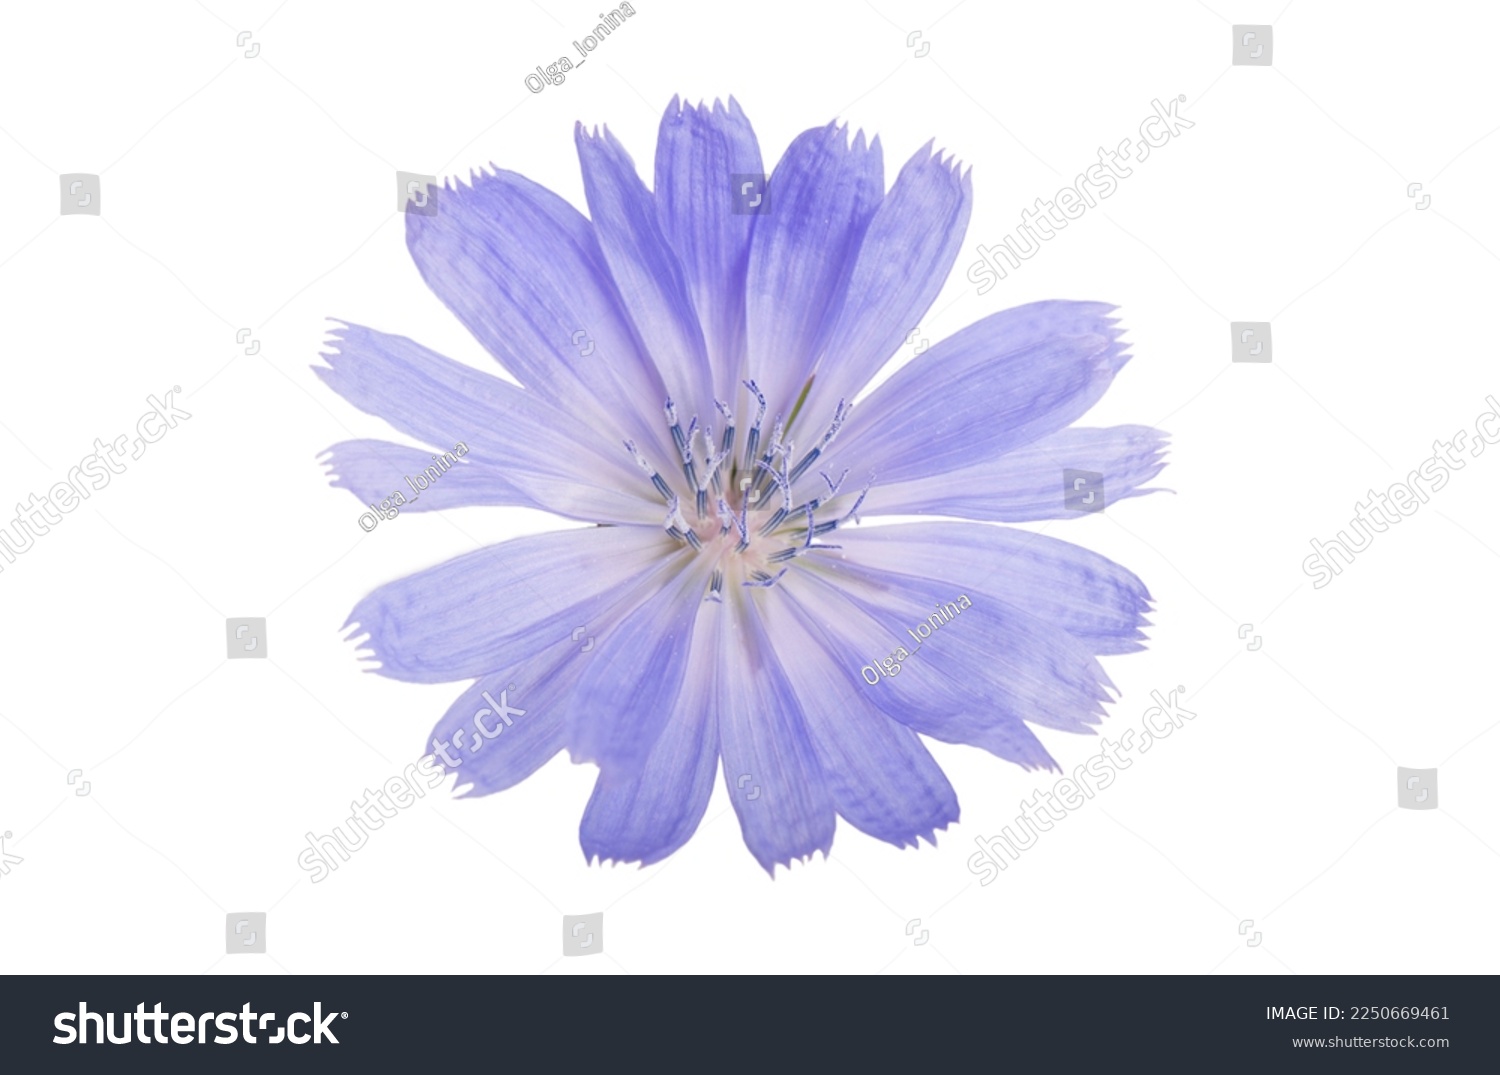 Cichorium intybus - common chicory flowers isolated on the white background #2250669461